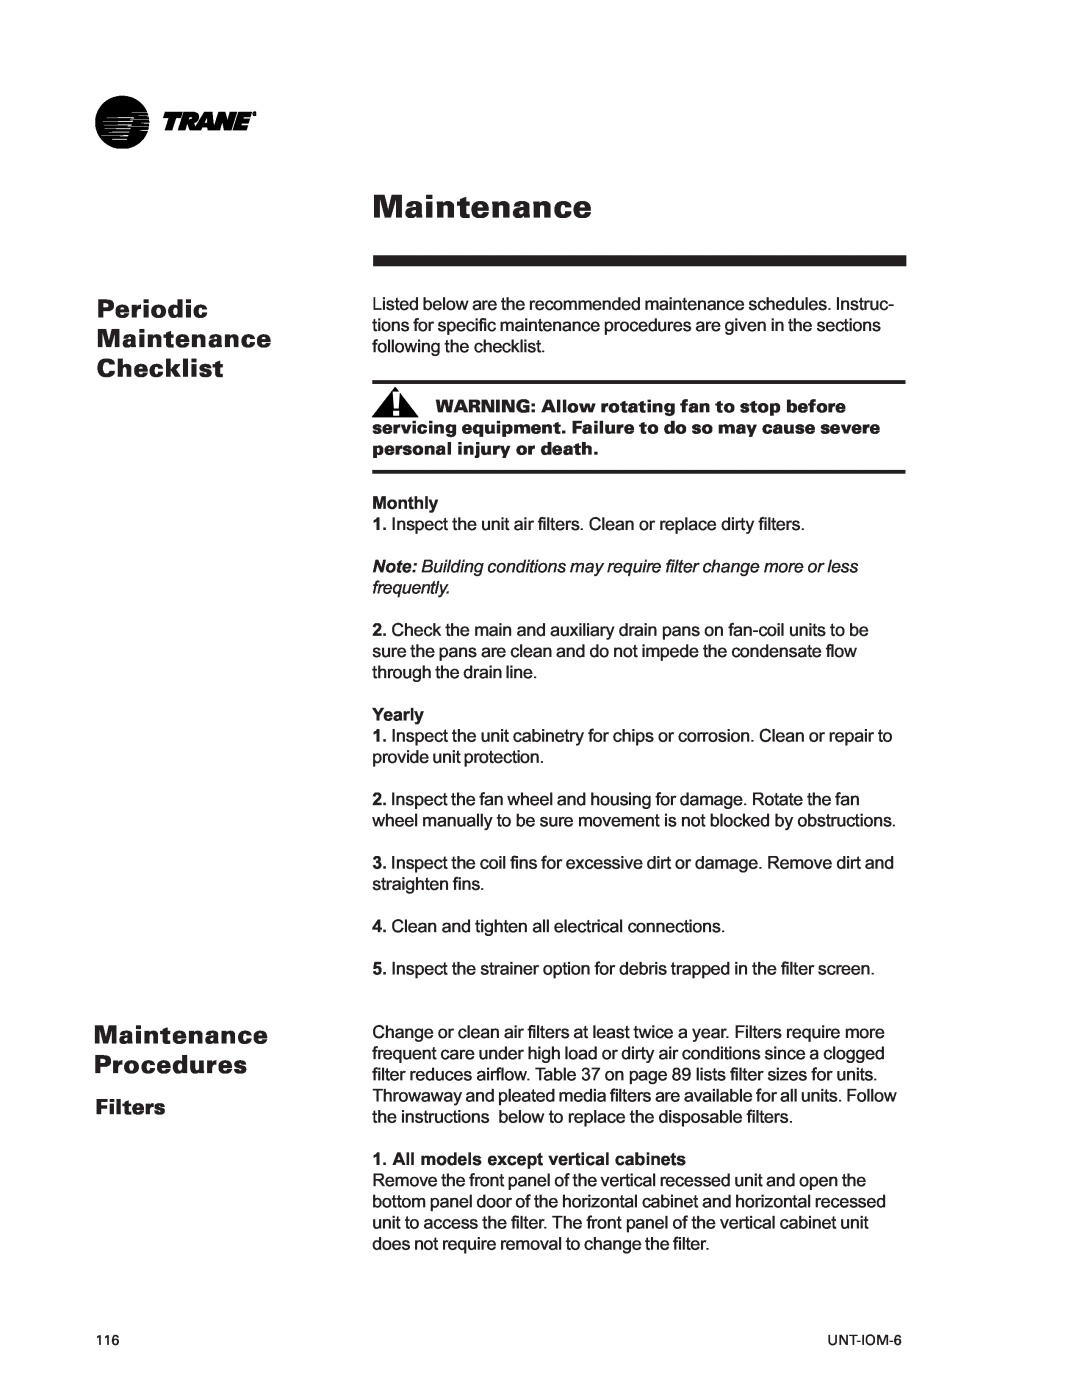 Trane LO manual Periodic Maintenance Checklist, Maintenance Procedures, Filters, Monthly, Yearly 